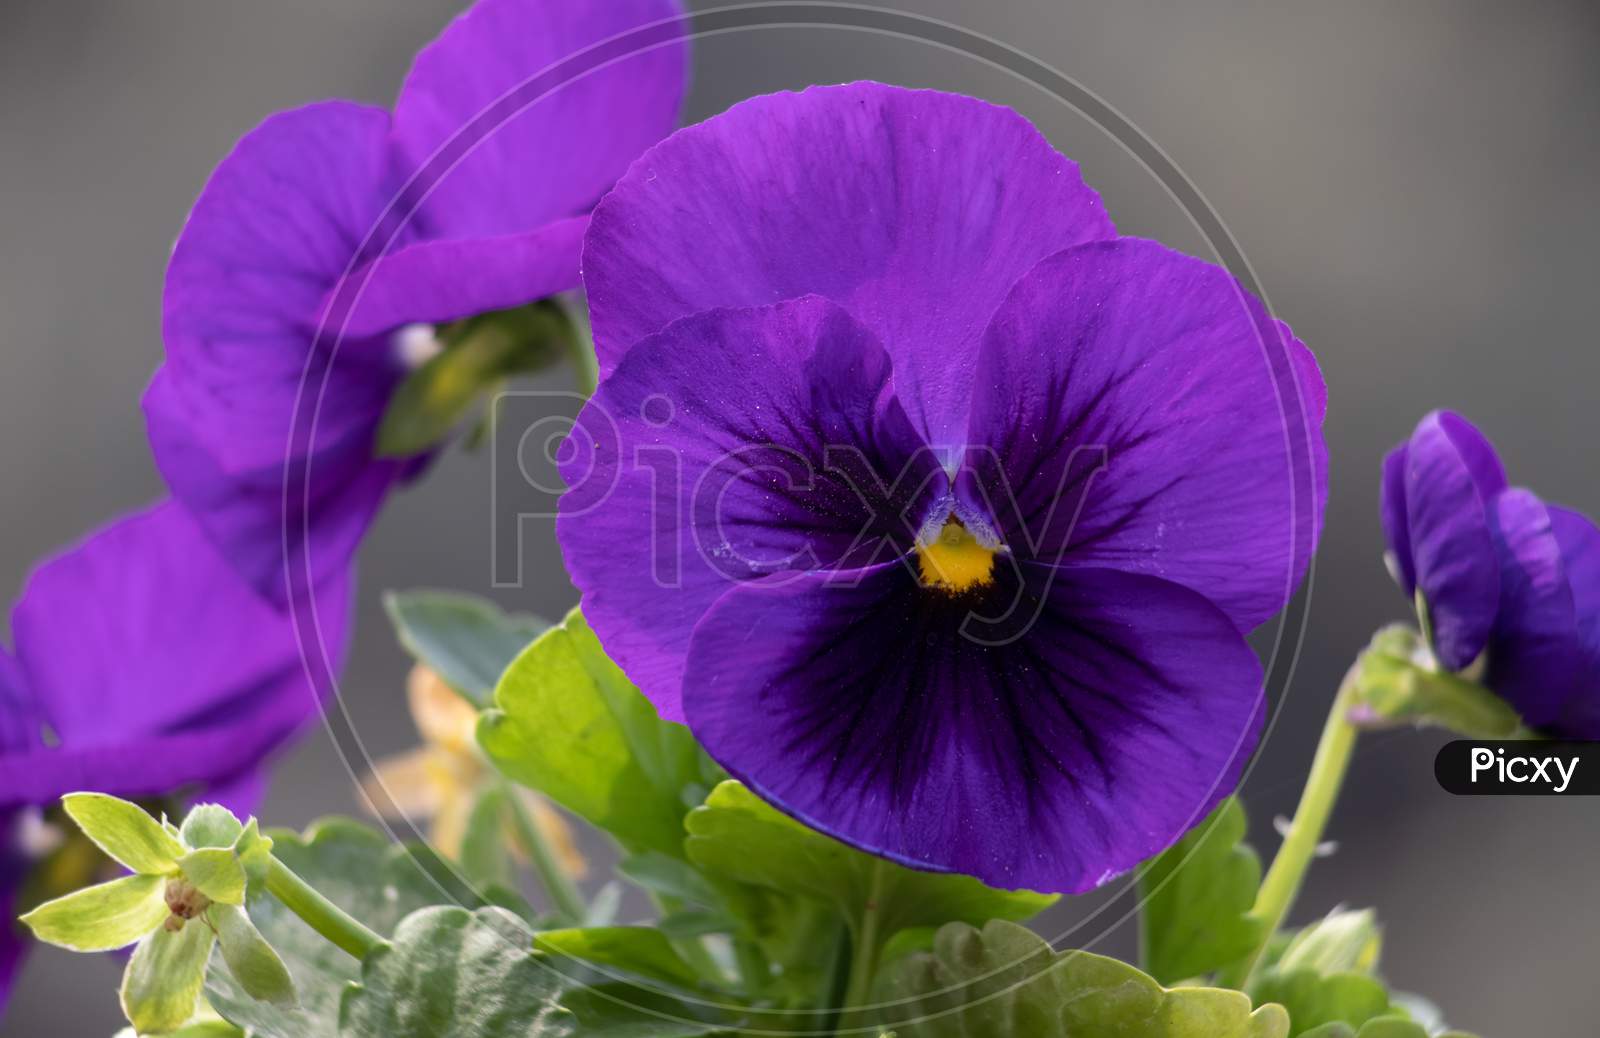 Garden Pansy Flower With Selective Focus, Perfect For Wallpaper